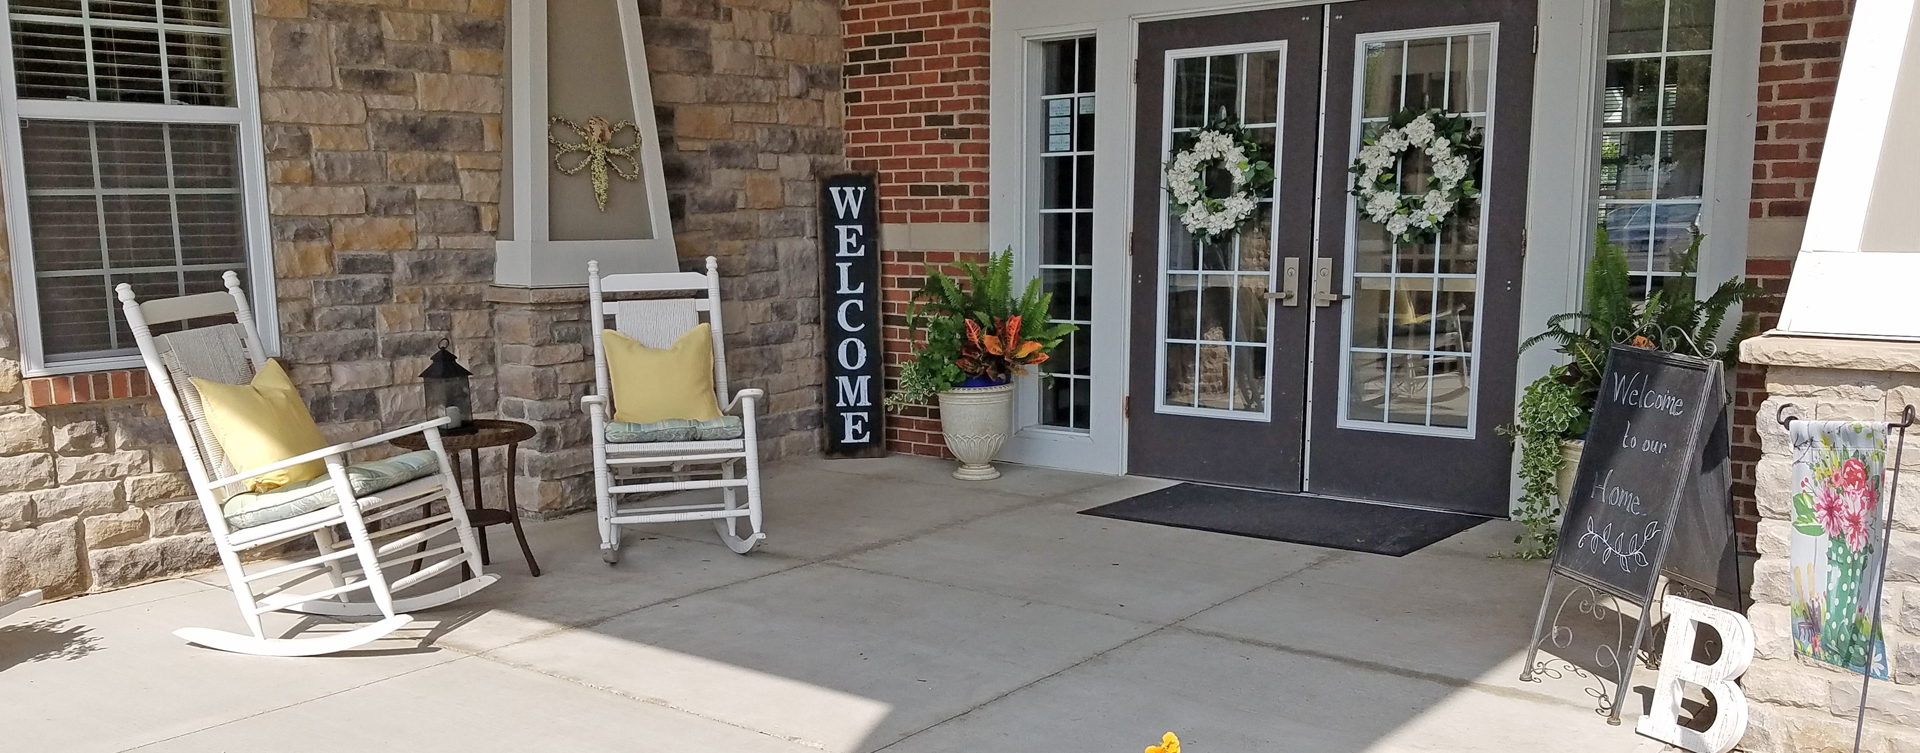 Enjoy conversations with friends on the porch at Bickford of Crystal Lake